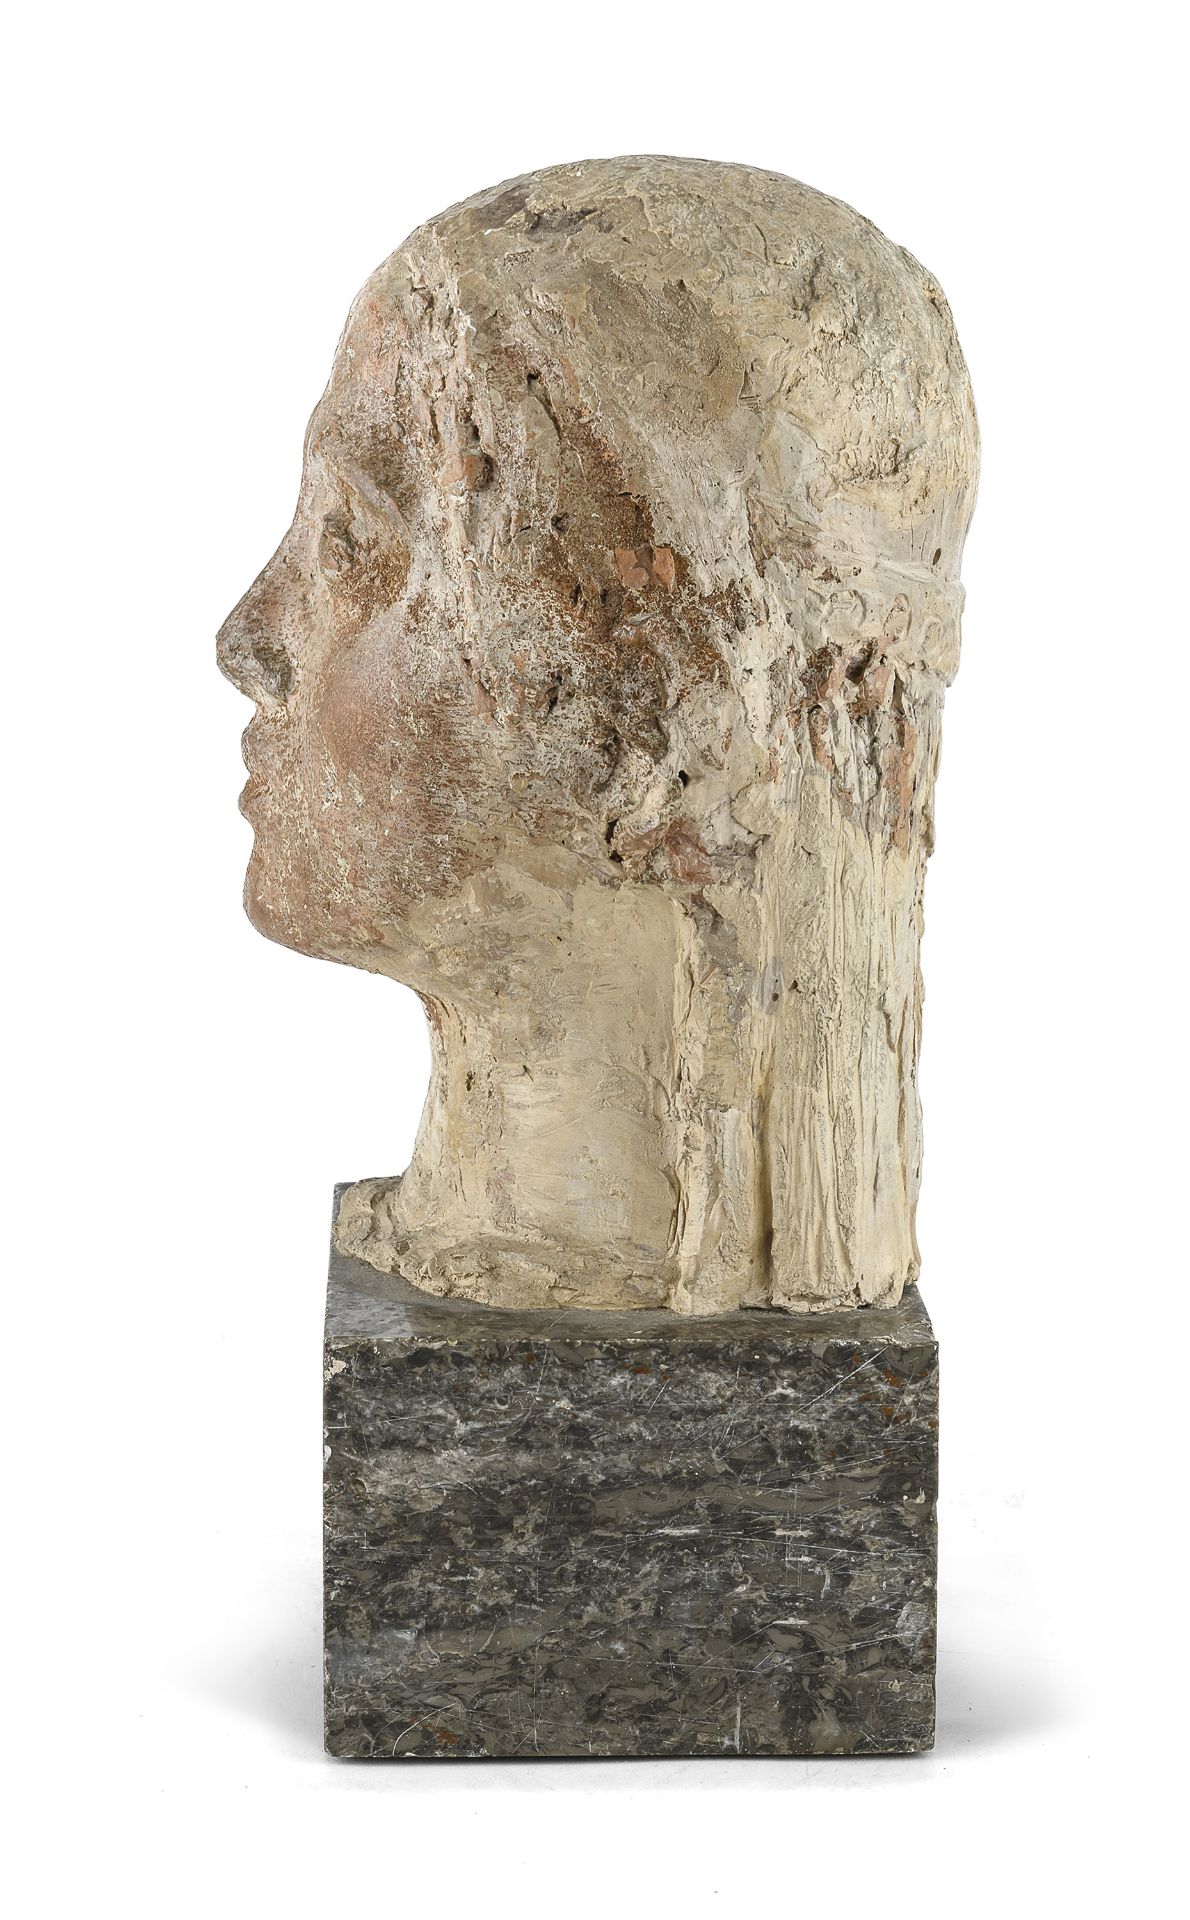 TERRACOTTA SCULPTURE OF A GIRL'S FACE - Image 2 of 3